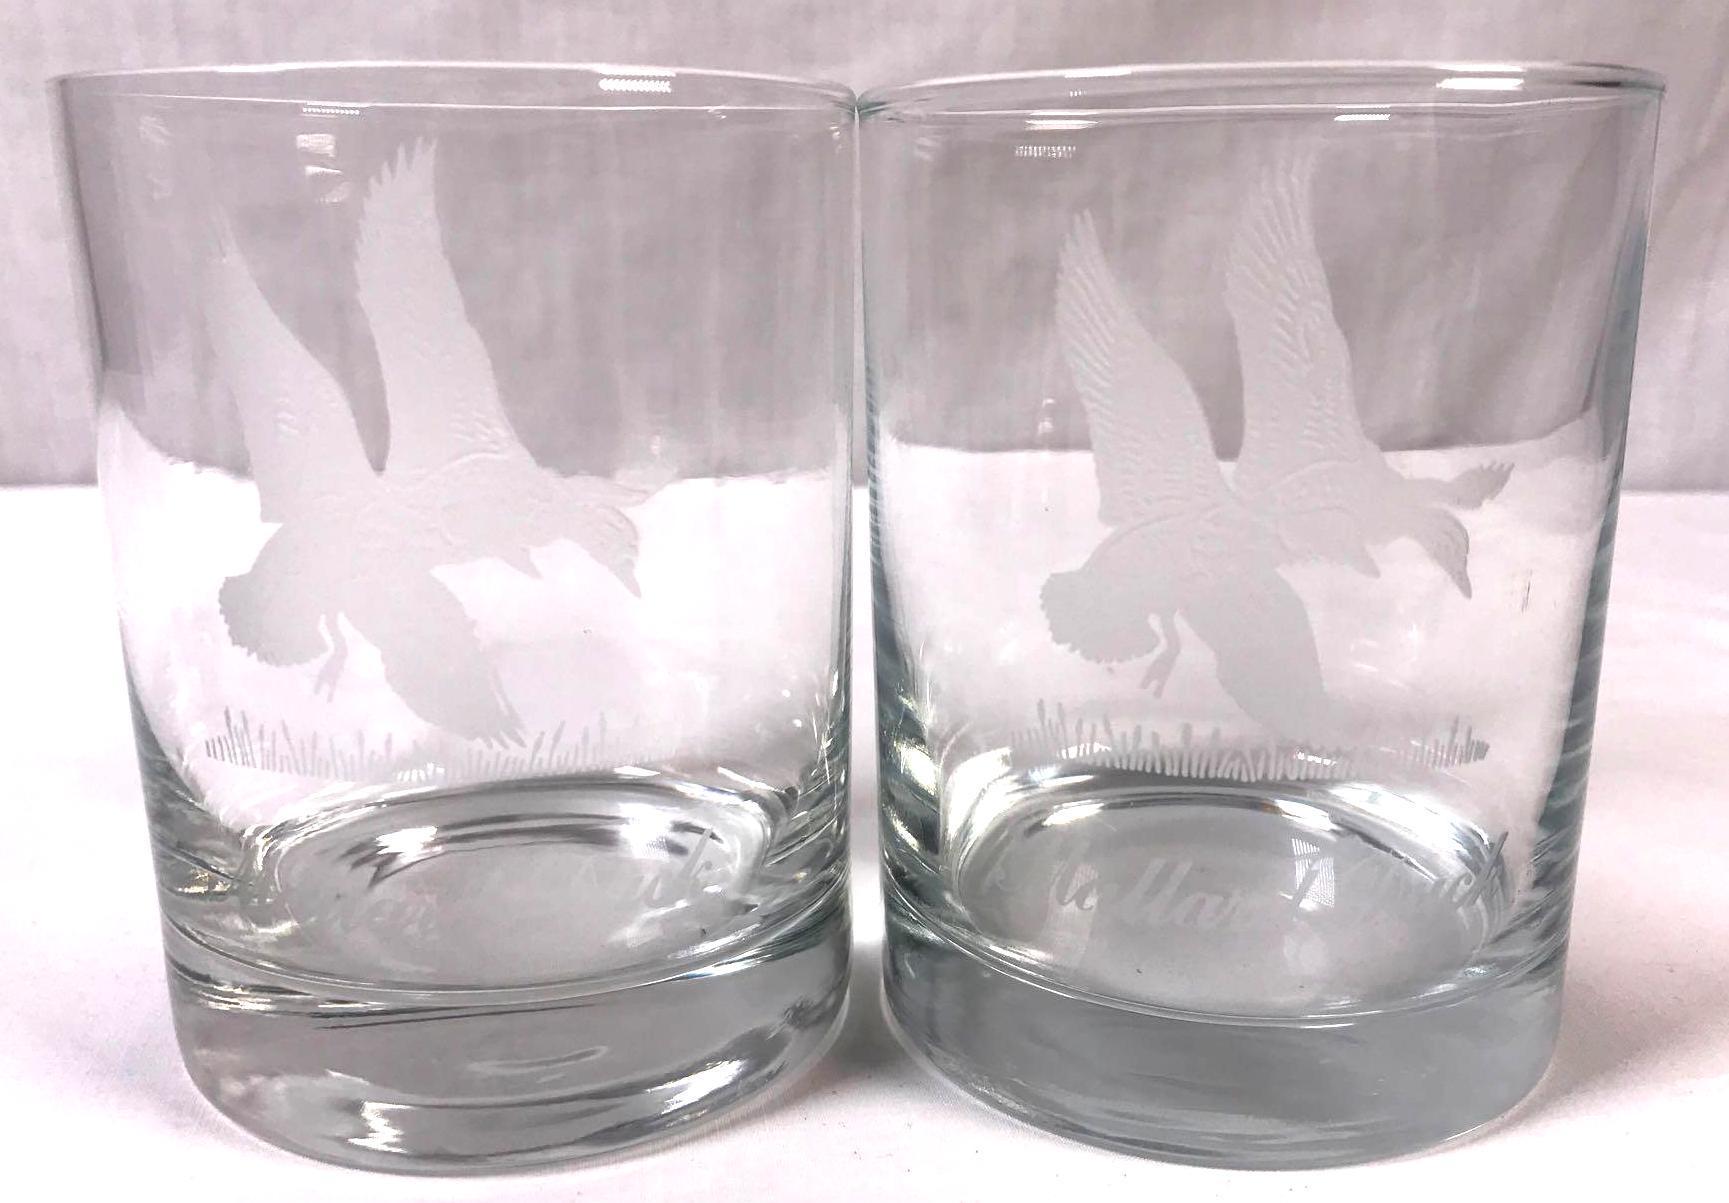 (12) Etched Bird Glasses